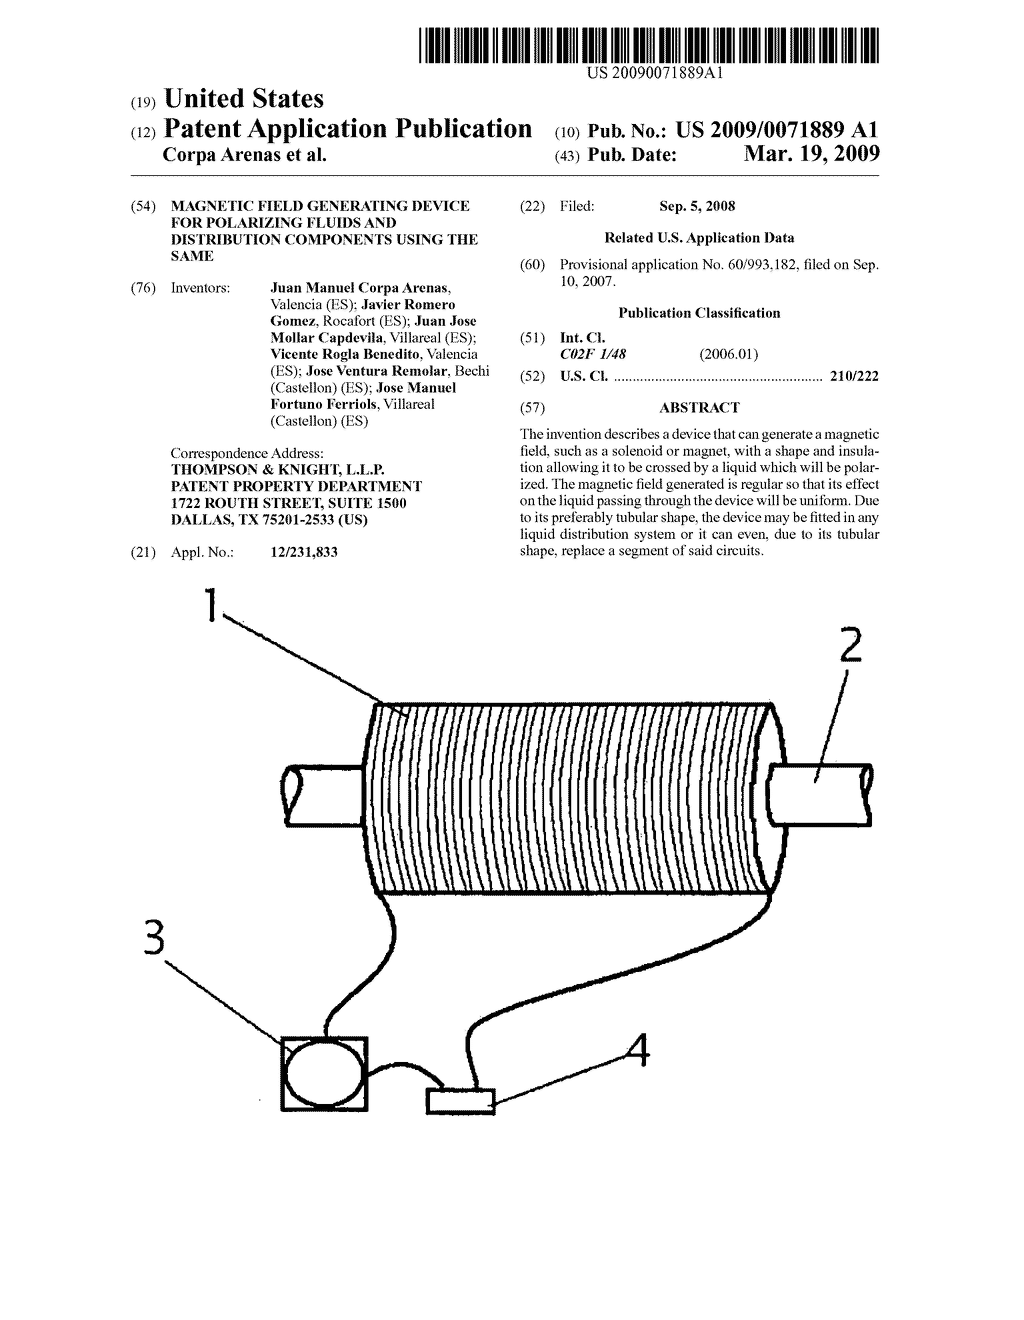 Magnetic field generating device for polarizing fluids and distribution components using the same - diagram, schematic, and image 01